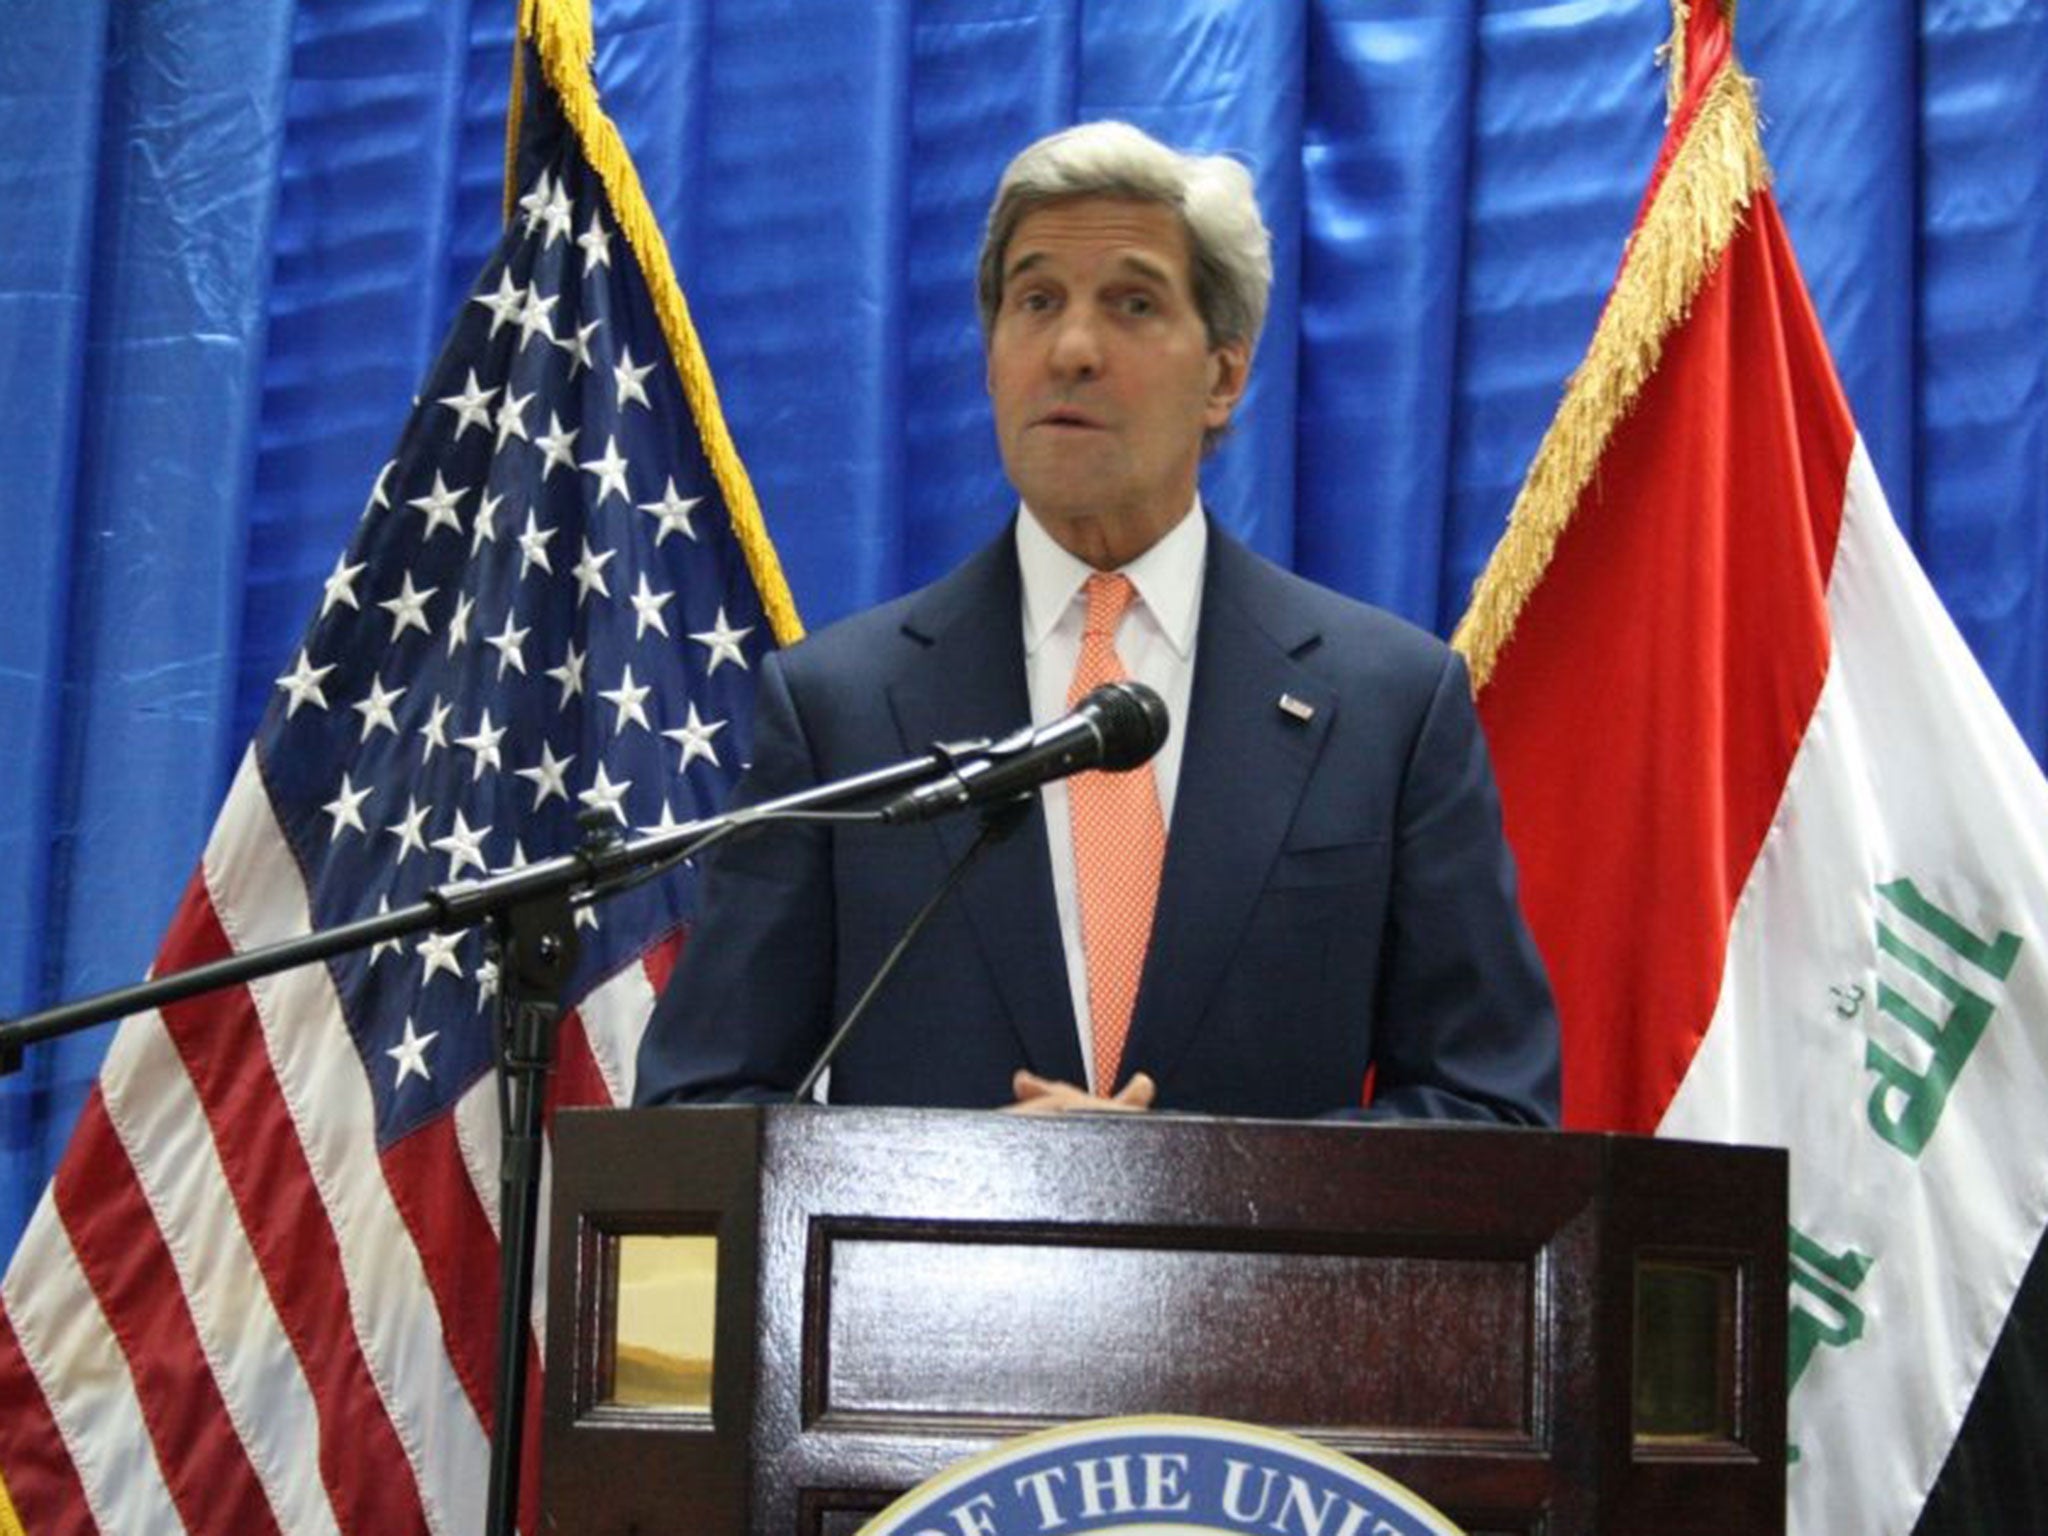 The US Secretary of State John Kerry speaks during a media conference at the Embassy of the USA in Baghdad, Iraq o June 23, 2014